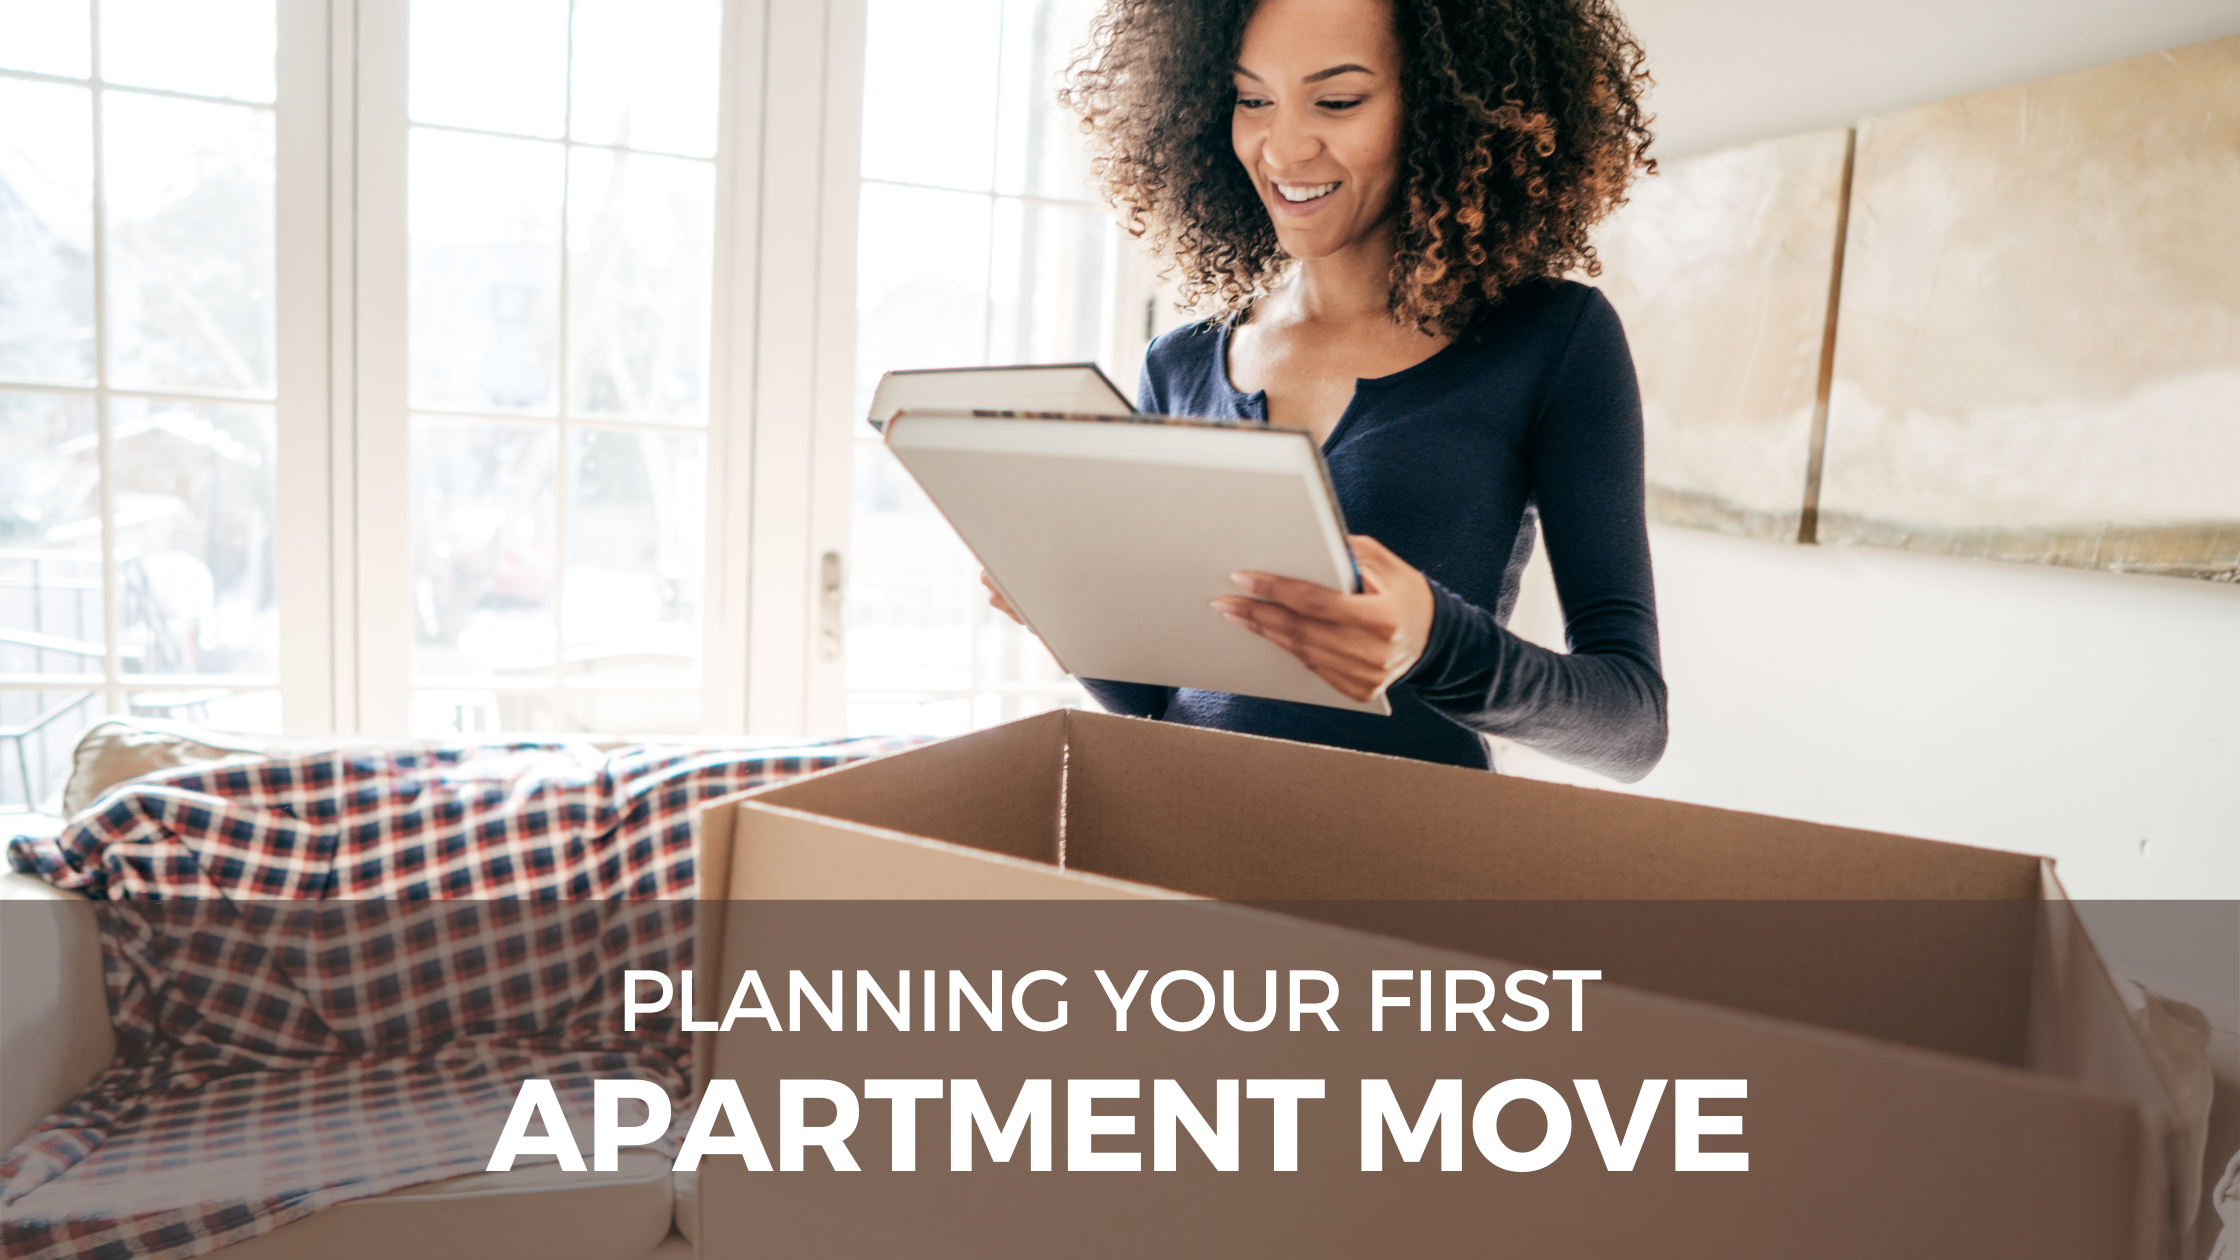 13+ Tips for Planning Your First Apartment Move | Timeline & Checklist -  The Huntswoman